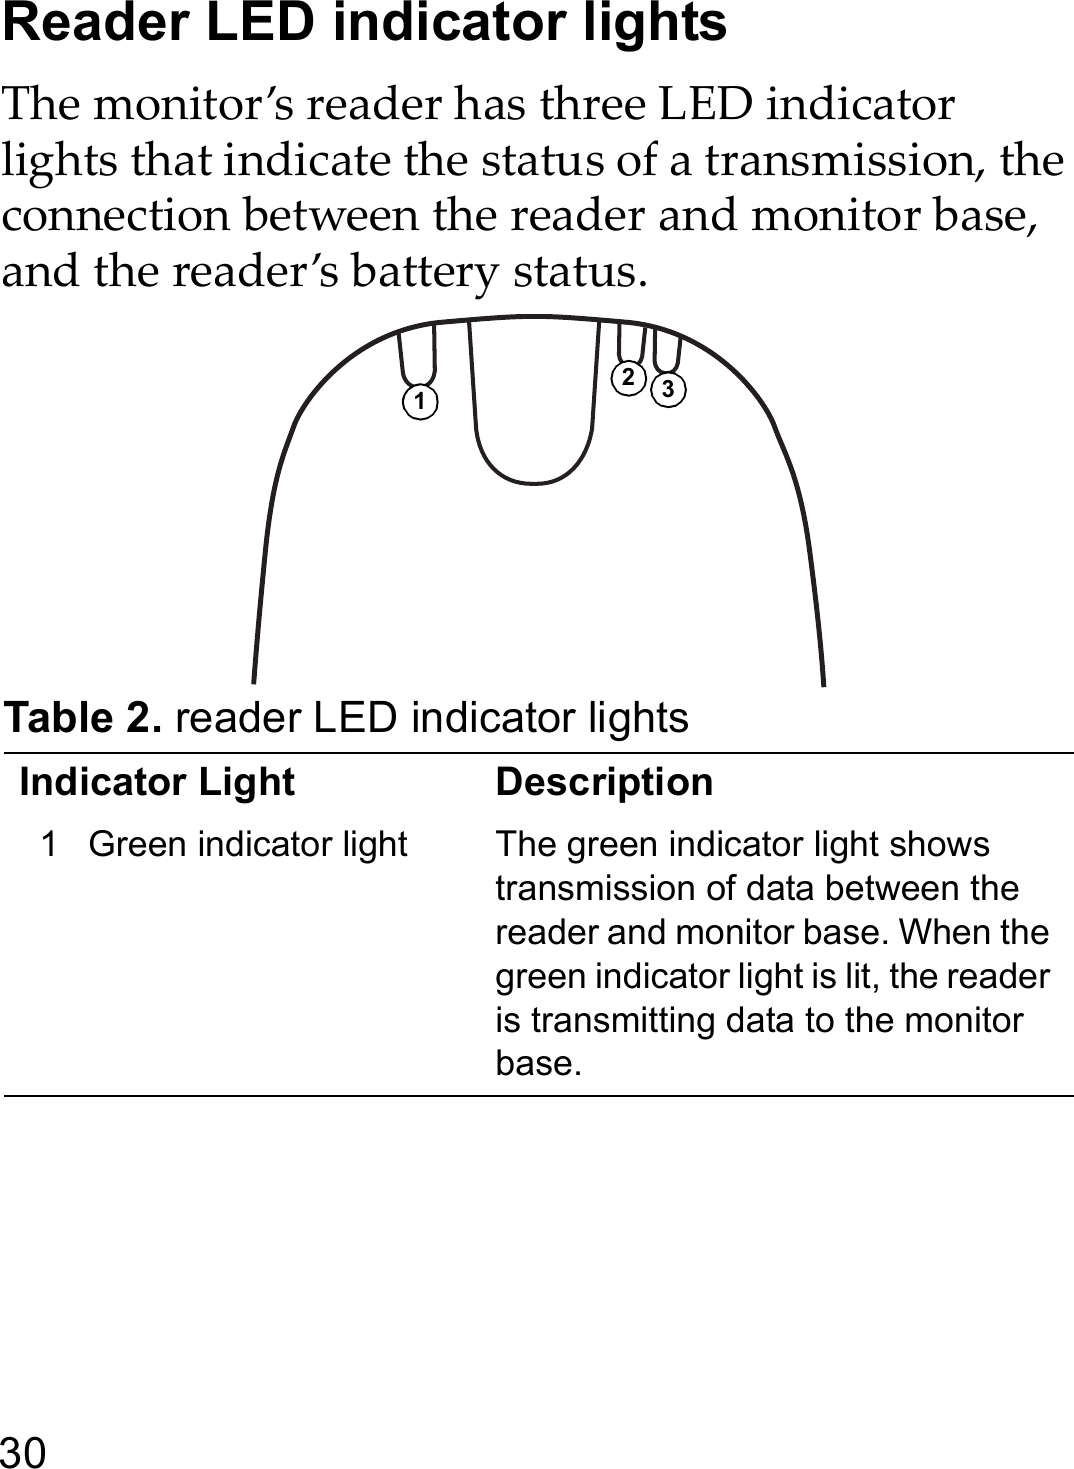 30Reader LED indicator lightsThe monitor’s reader has three LED indicator lights that indicate the status of a transmission, the connection between the reader and monitor base, and the reader’s battery status.Table 2. reader LED indicator lightsIndicator Light Description1 Green indicator light The green indicator light shows transmission of data between the reader and monitor base. When the green indicator light is lit, the reader is transmitting data to the monitor base.123